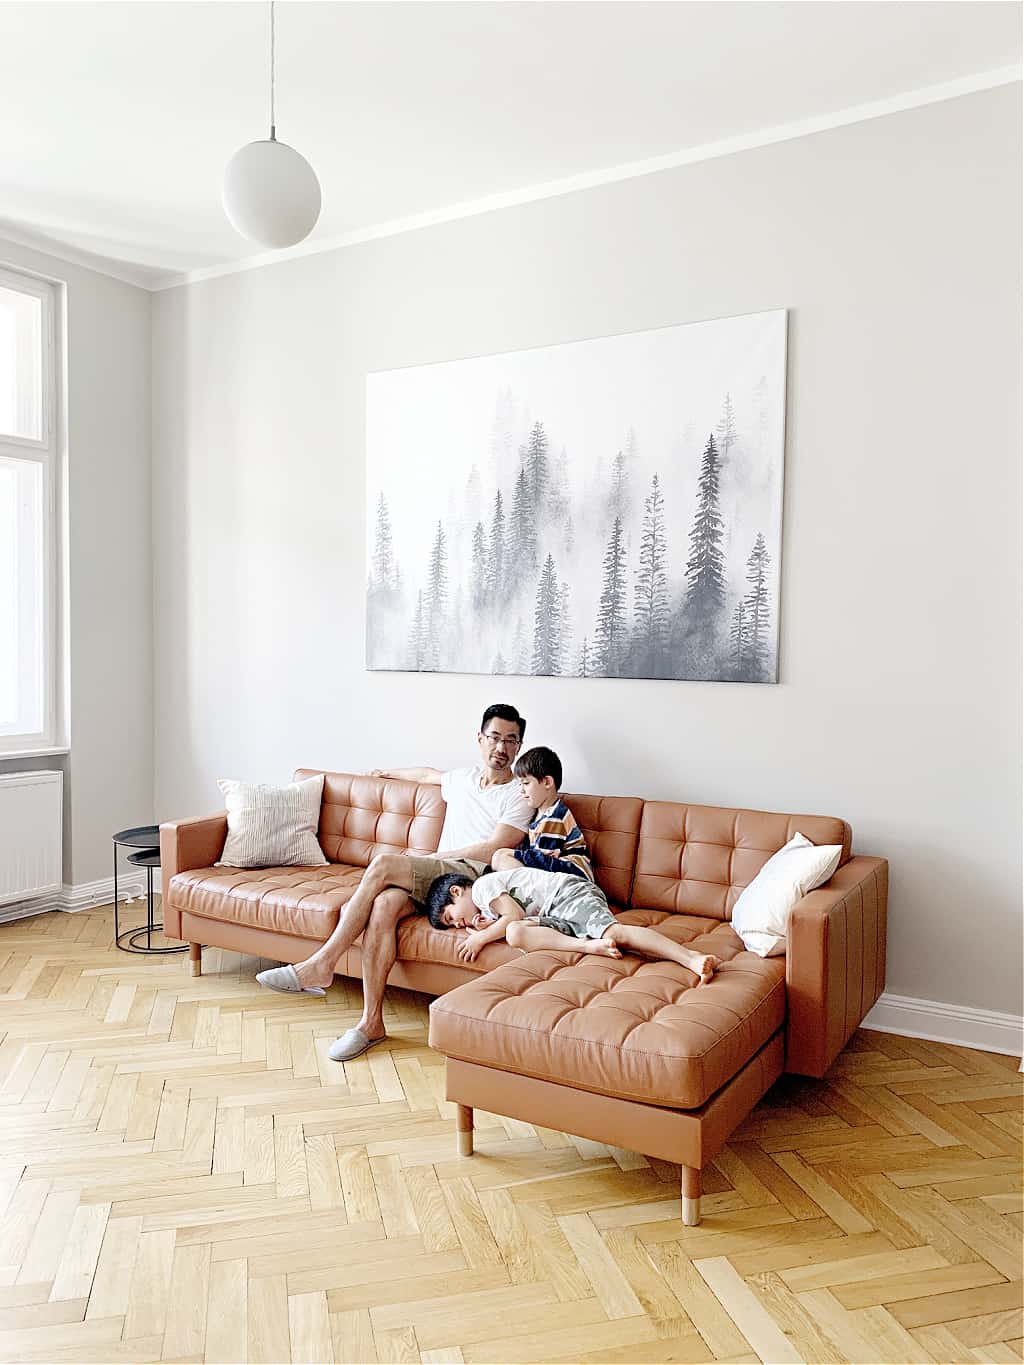 A minimalist family sitting on a couch in their minimalist living room.